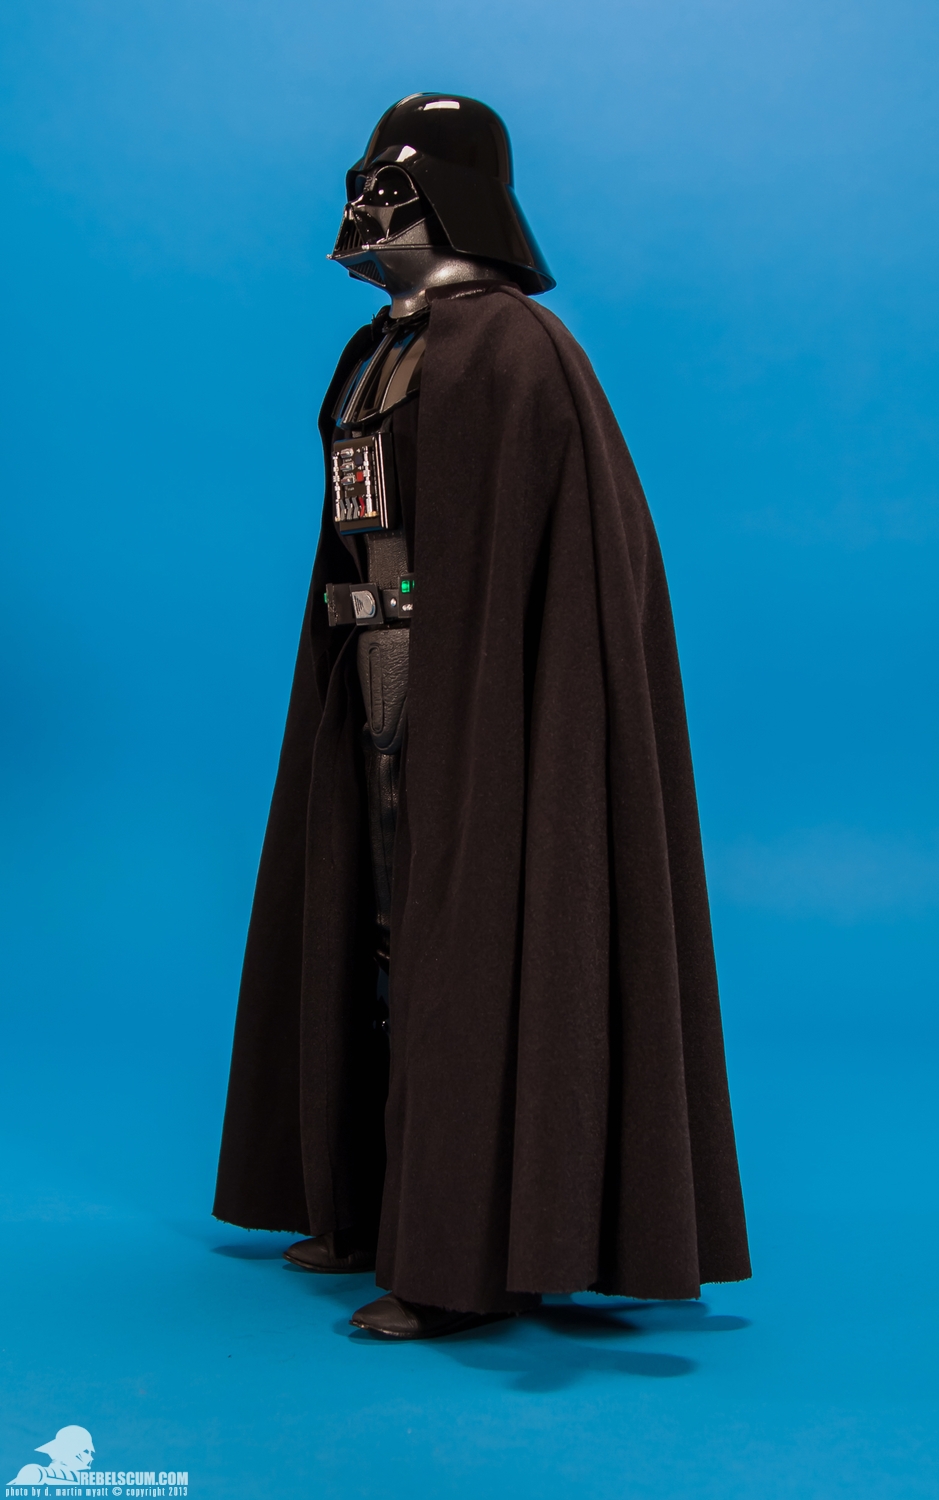 Darth-Vader-Return-Of-The-Jedi-Sixth-Scale-Sideshow-Collectibles-003.jpg